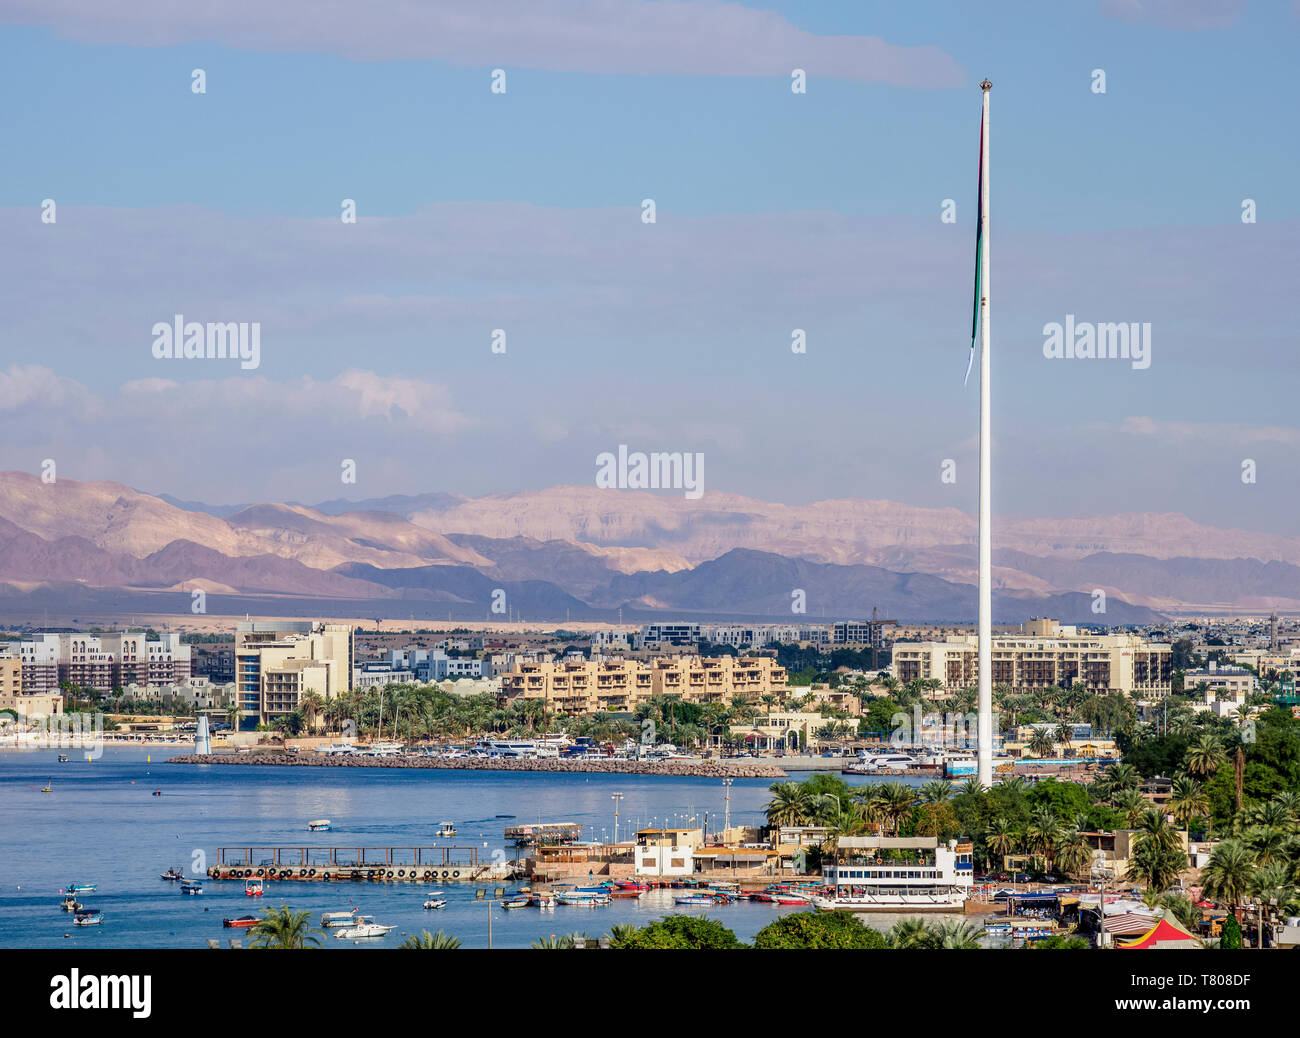 Aqaba, elevated view, Aqaba Governorate, Jordan, Middle East Stock Photo